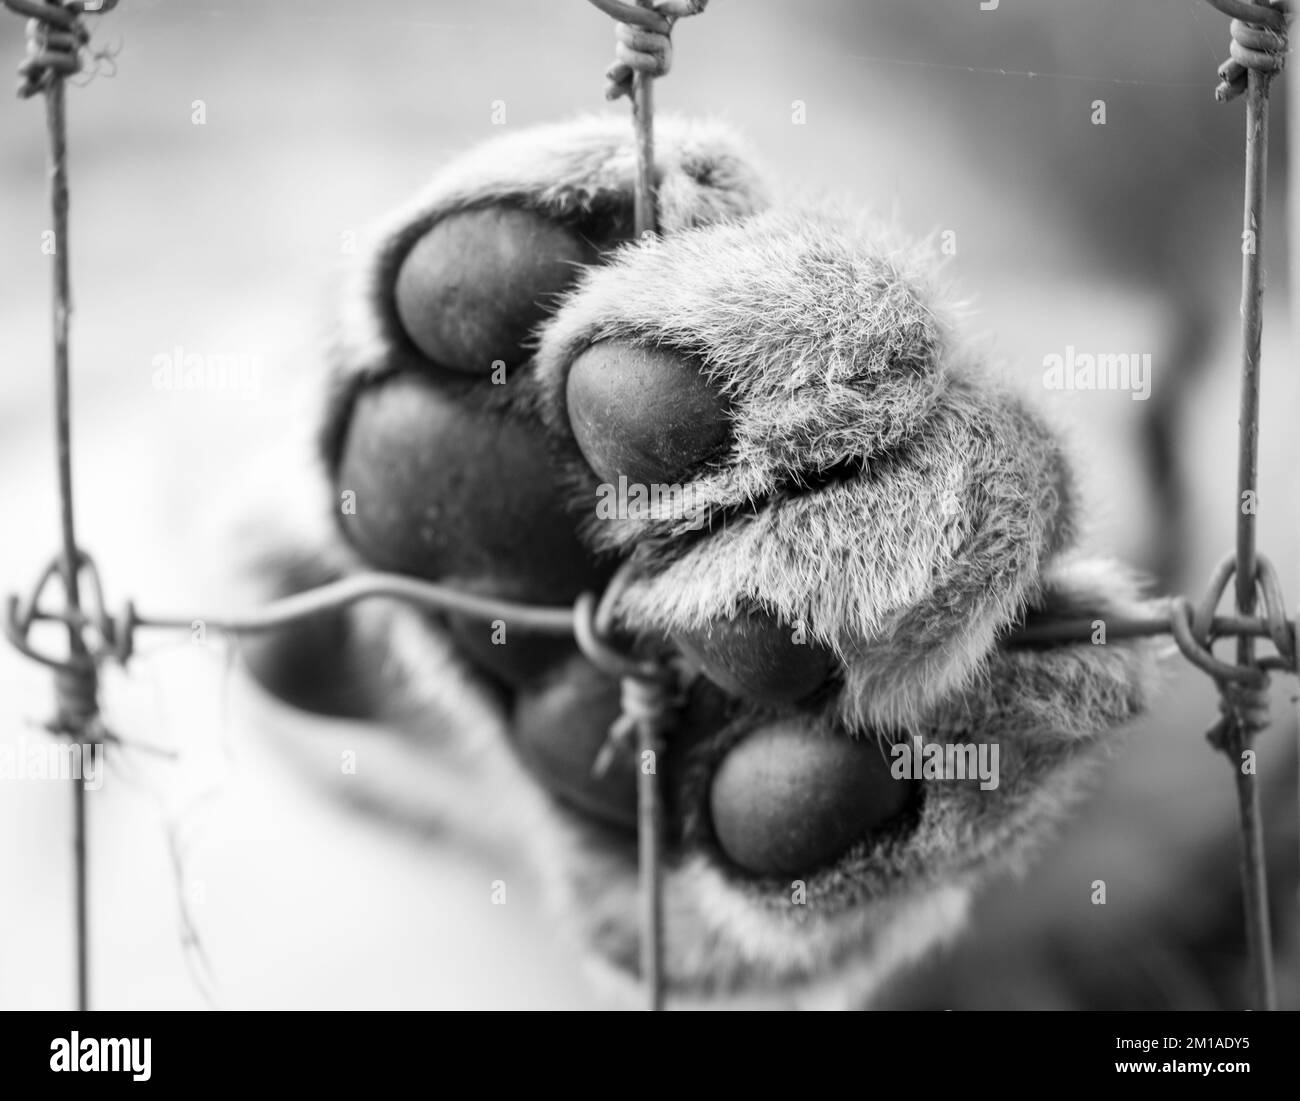 Close up of a Lions Paw in a Zoo.The Lion has its paw resting on some steel wire fencing Stock Photo